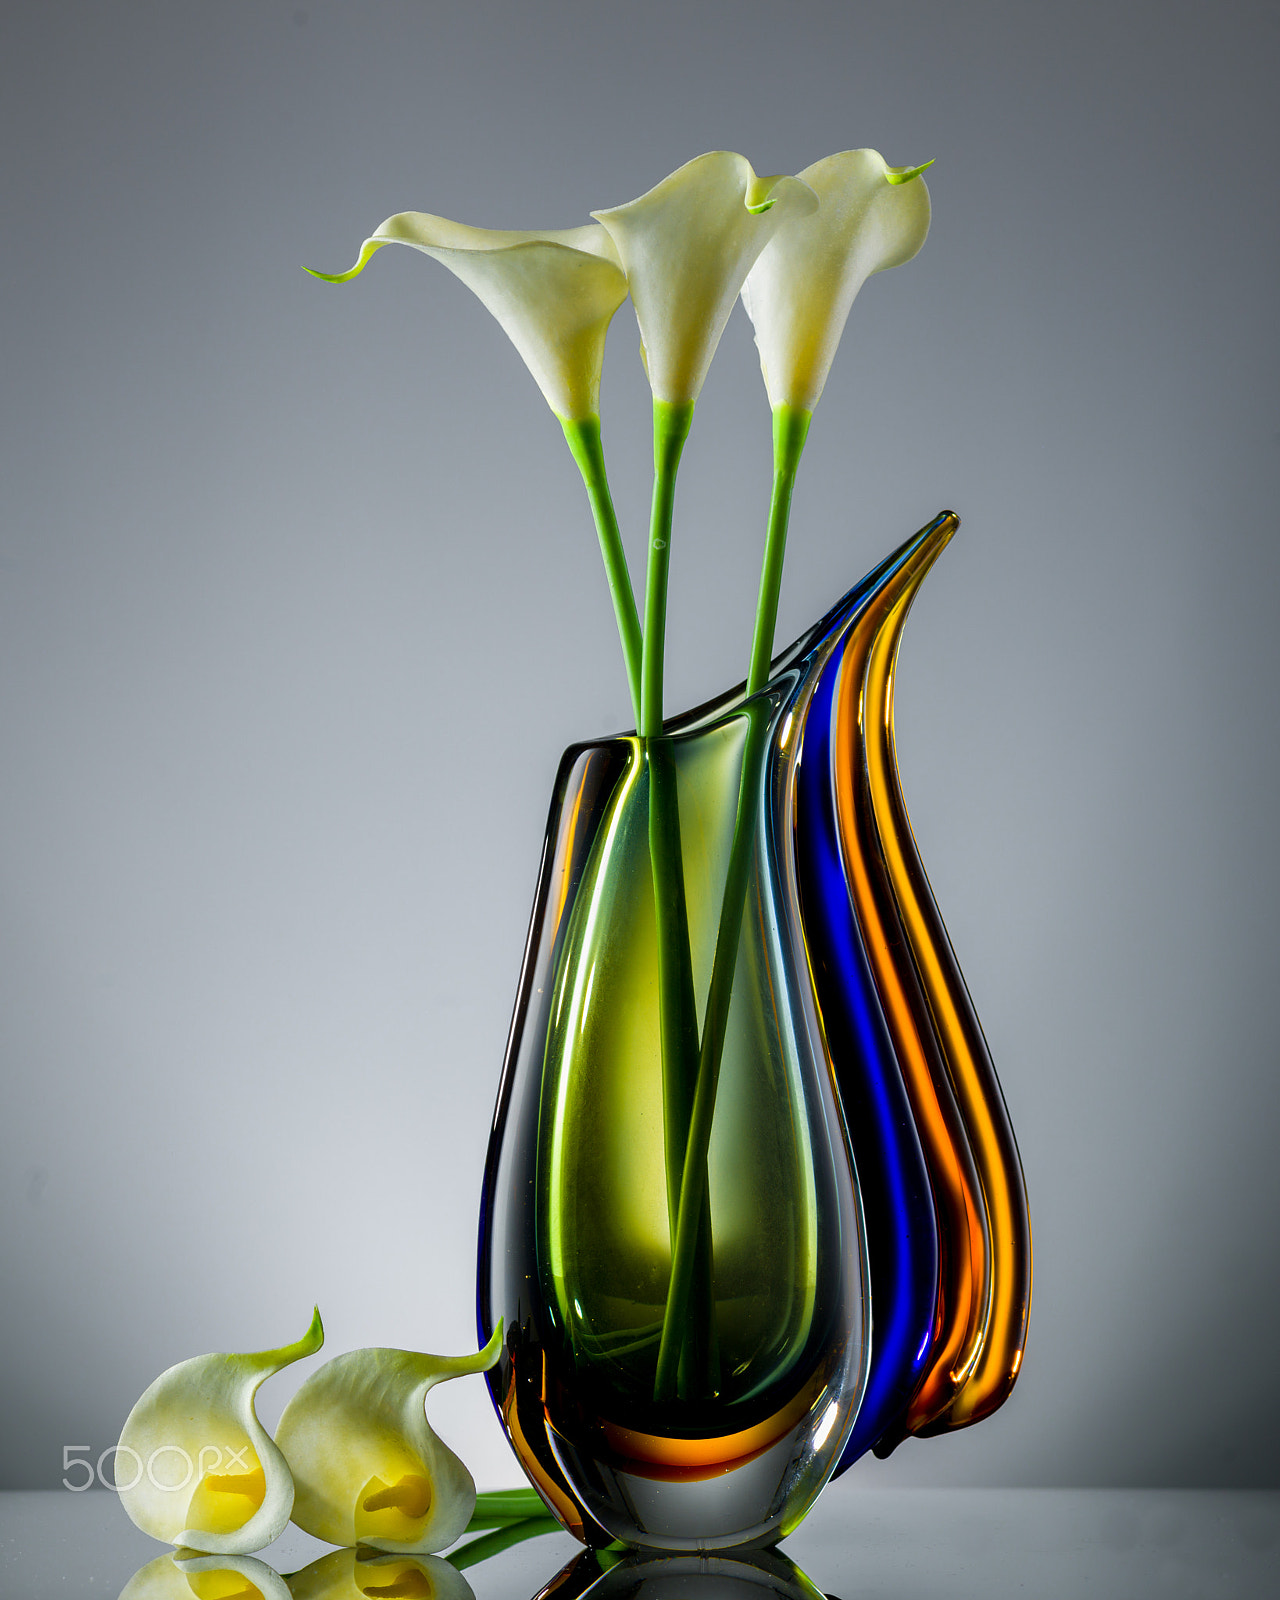 HC 120 sample photo. Lilies and glass photography